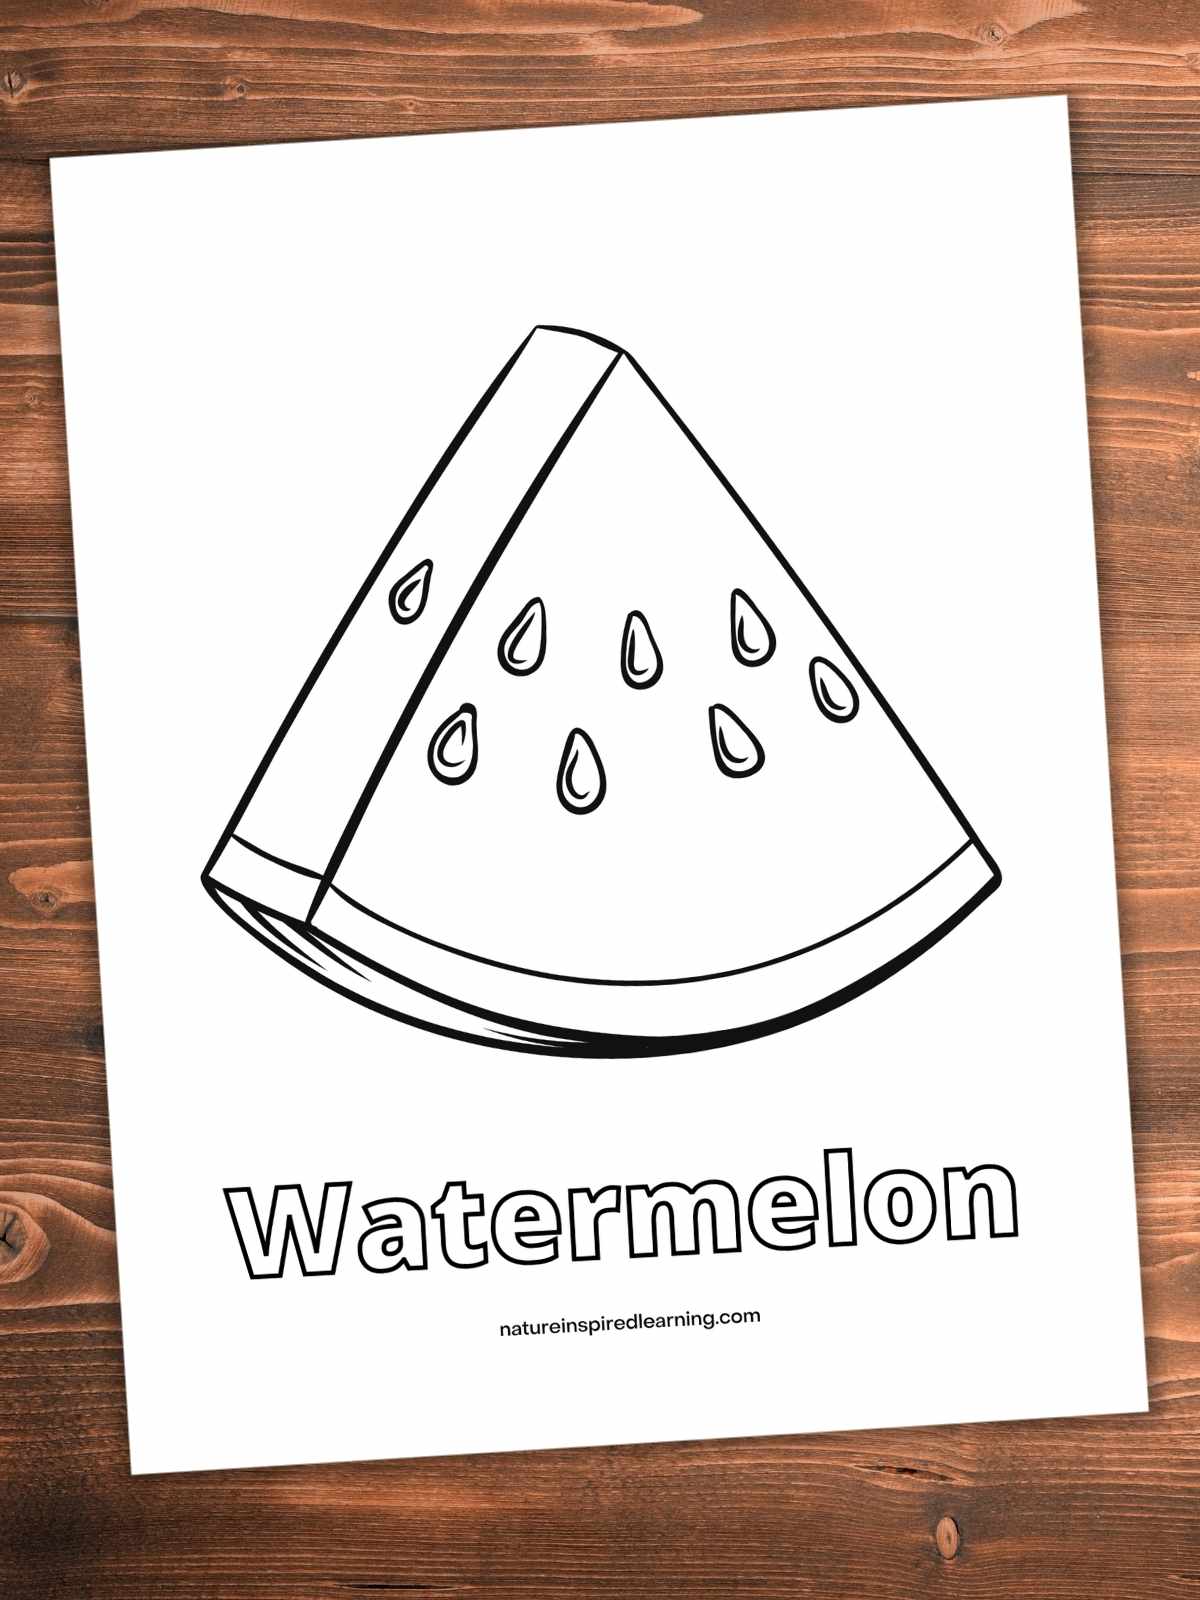 one large watermelon slice with seeds with word Watermelon written in bubble letters below. Printable on a wooden background